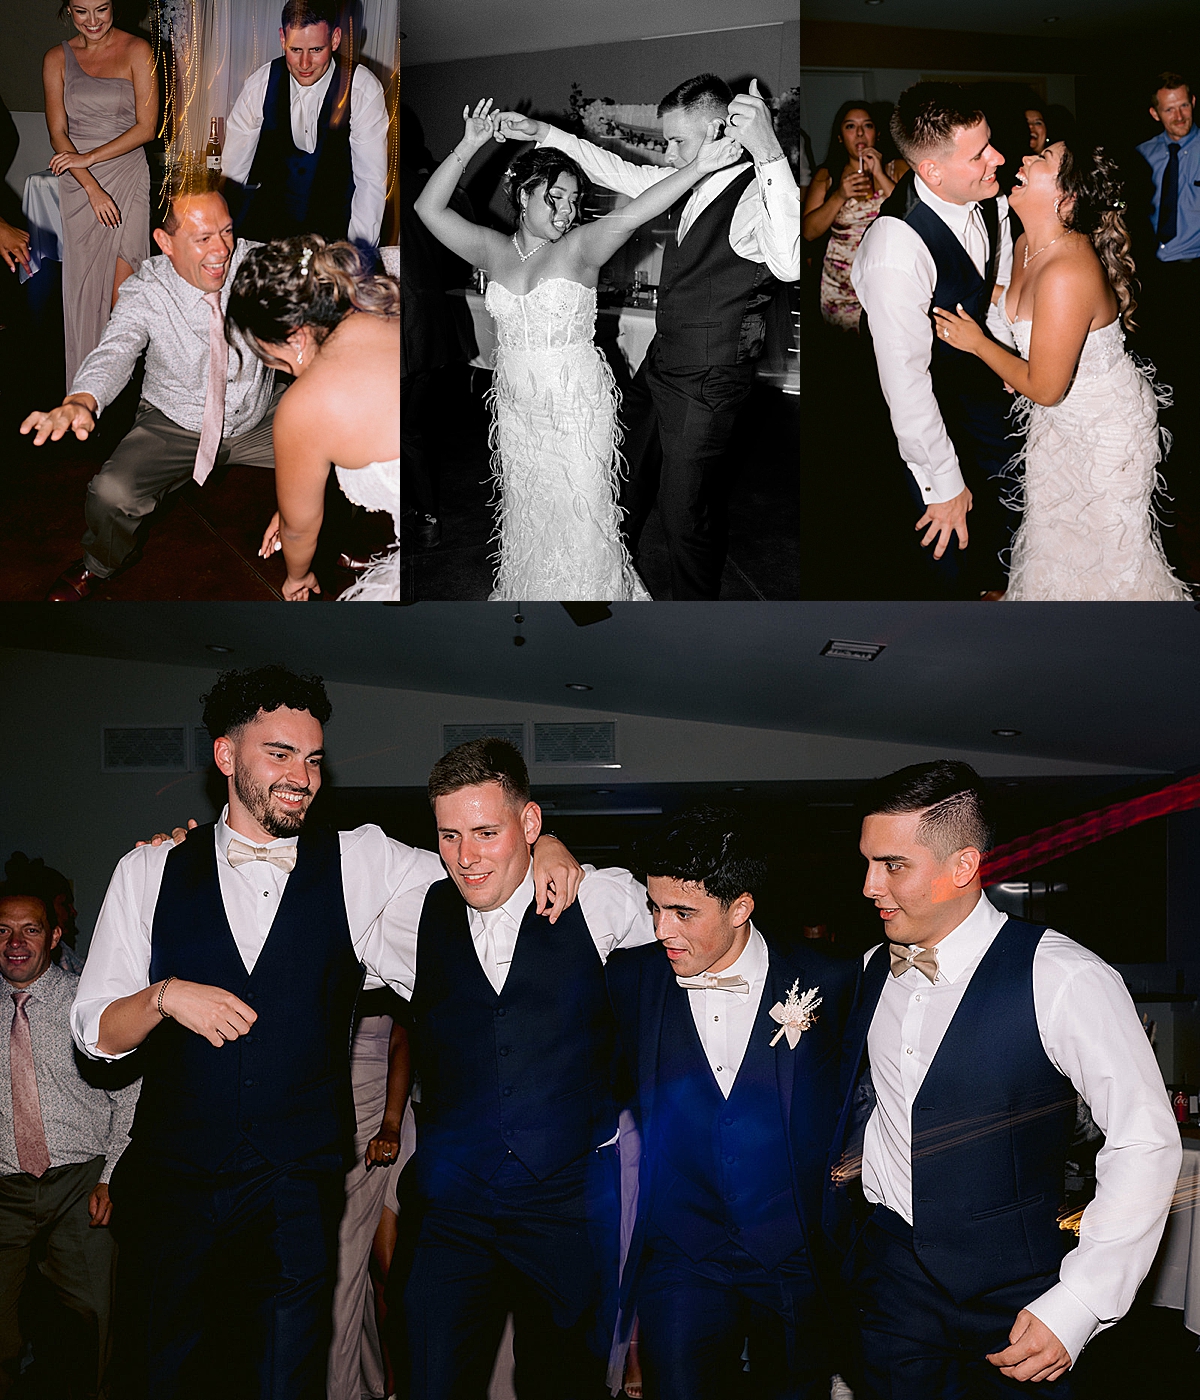 groom and groomsmen dance together at reception by destination wedding photographer 